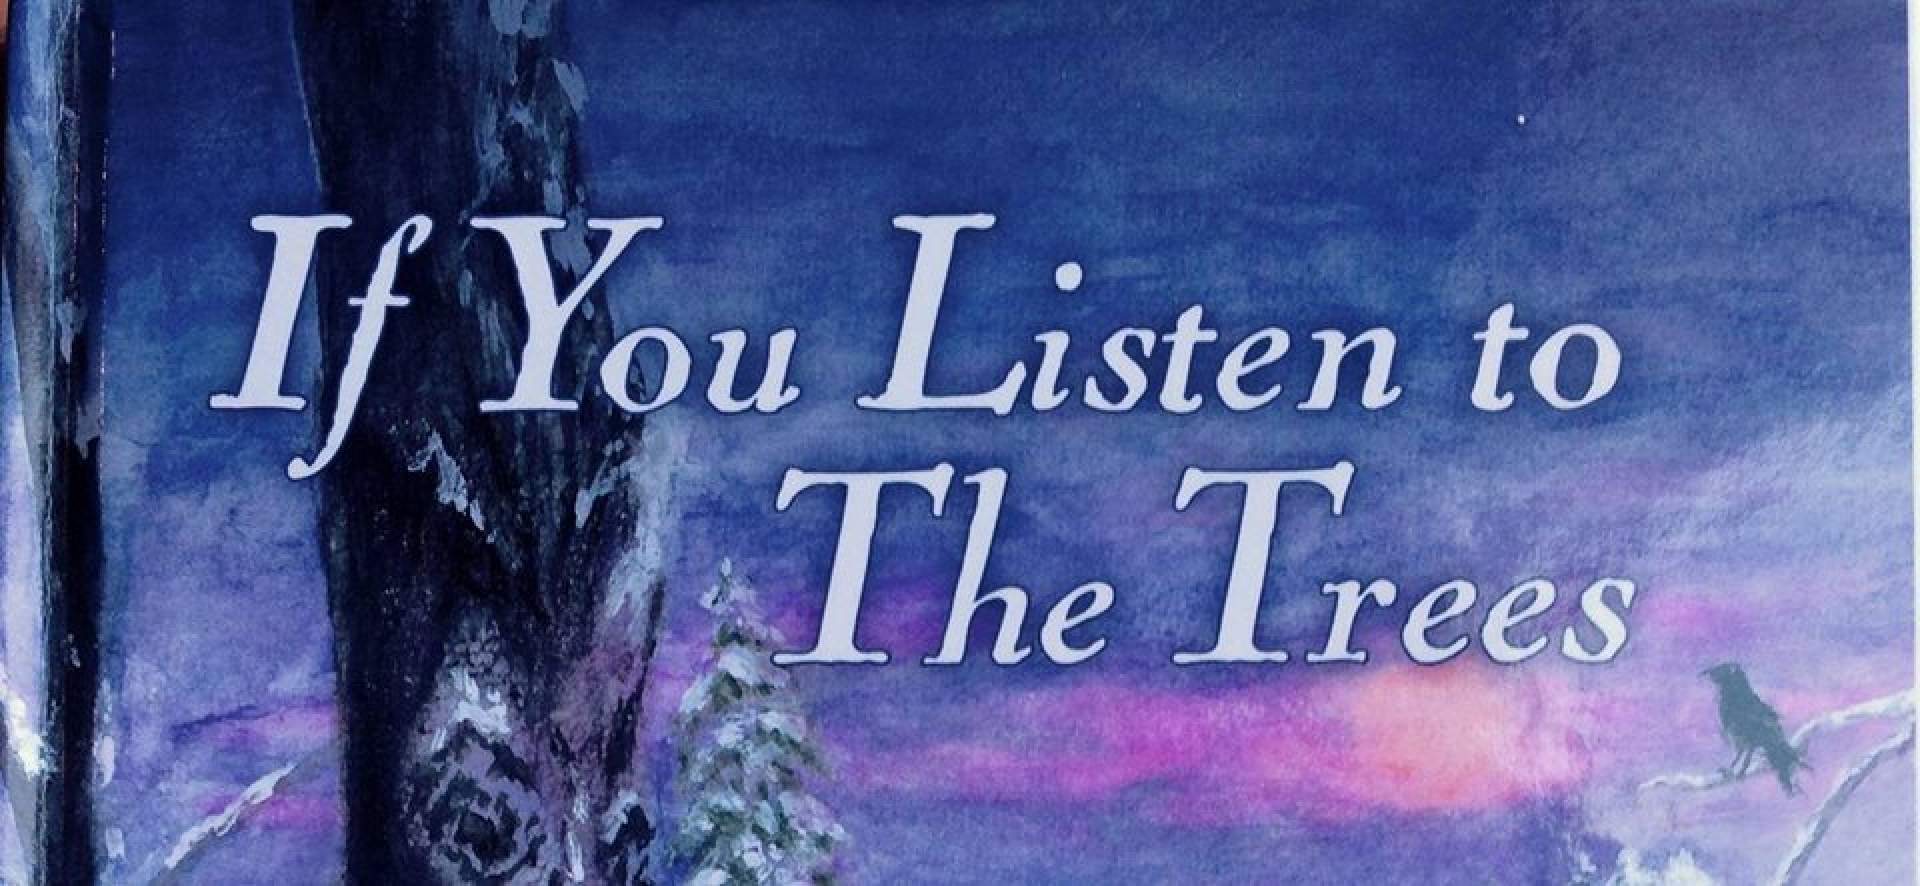 CHILDREN'S BOOK CLUB: If You Listen to the Trees by Wendy Essrow